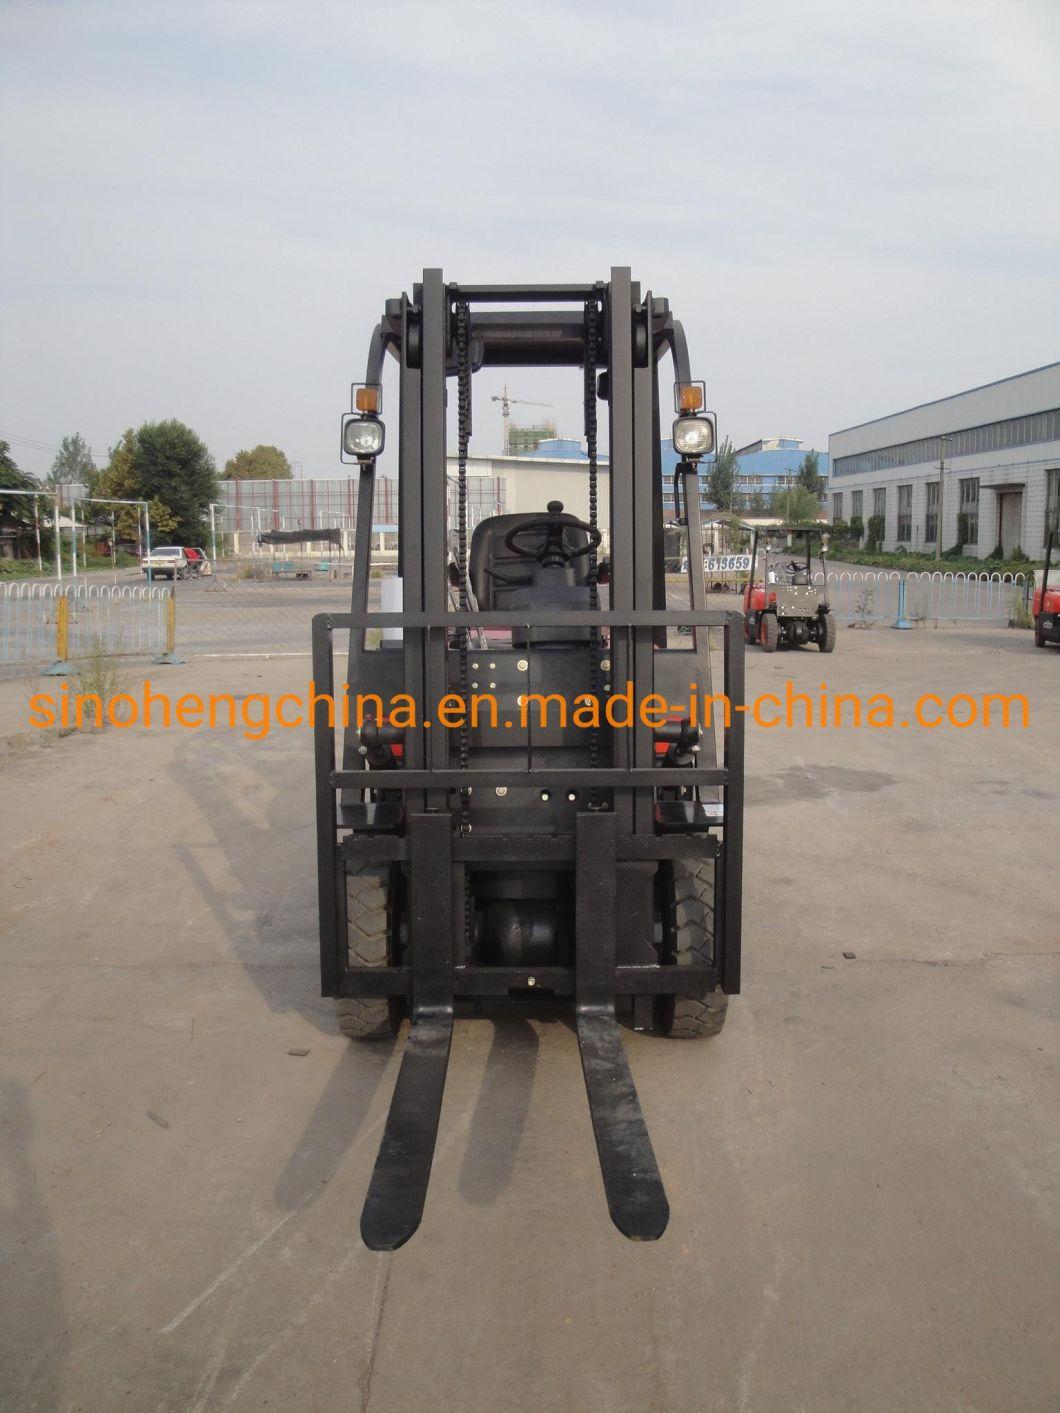 2 Ton Diesel Forklift with Ce Sh20fr